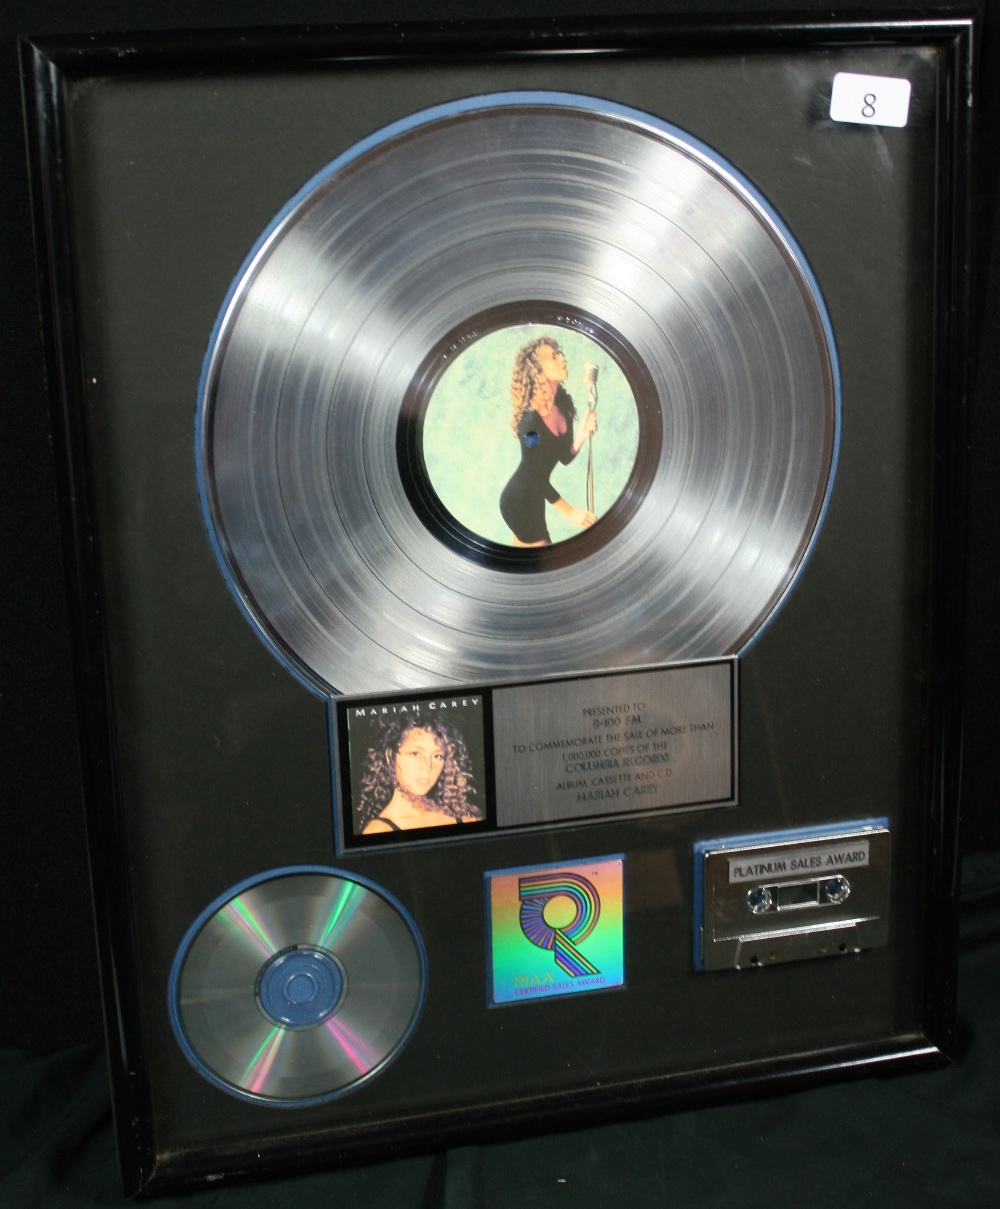 MARIAH CAREY PLATINUM AWARD - RIAA award presented to B-100 FM to commemorate the sale of more than